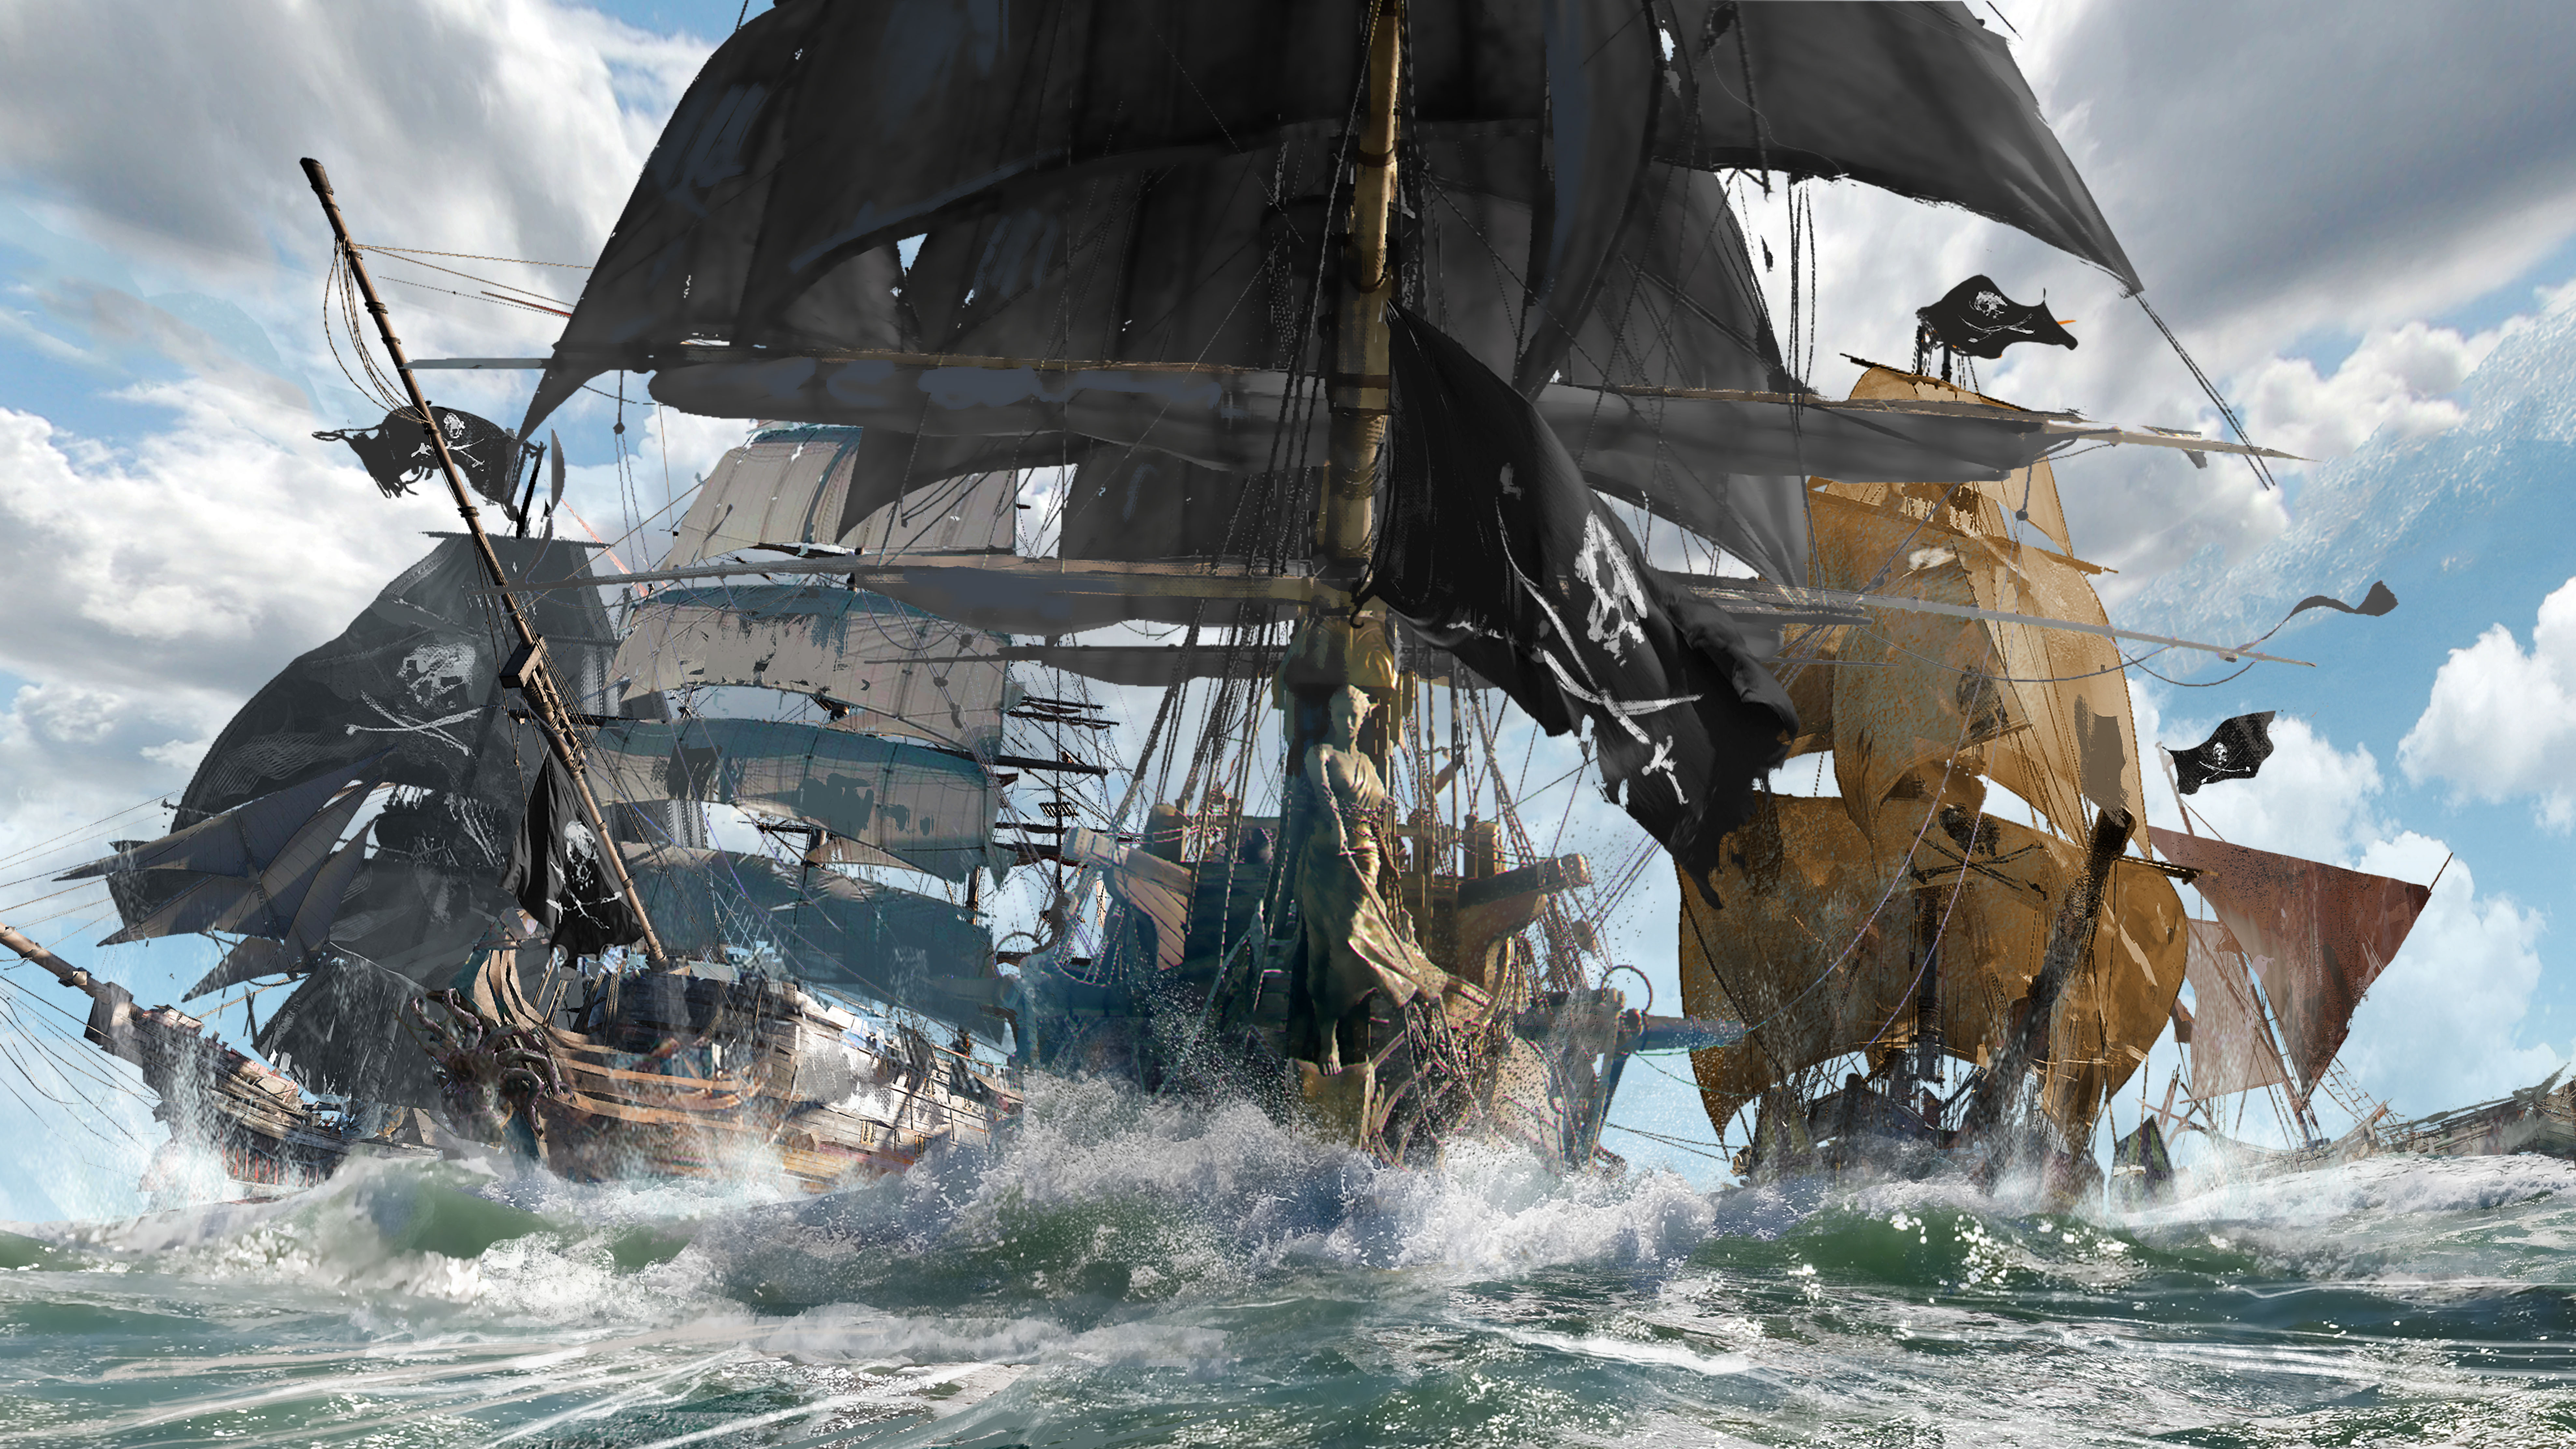 Skull and Bones gets November 8 release date on Xbox Series X, S, PC, and  PS5